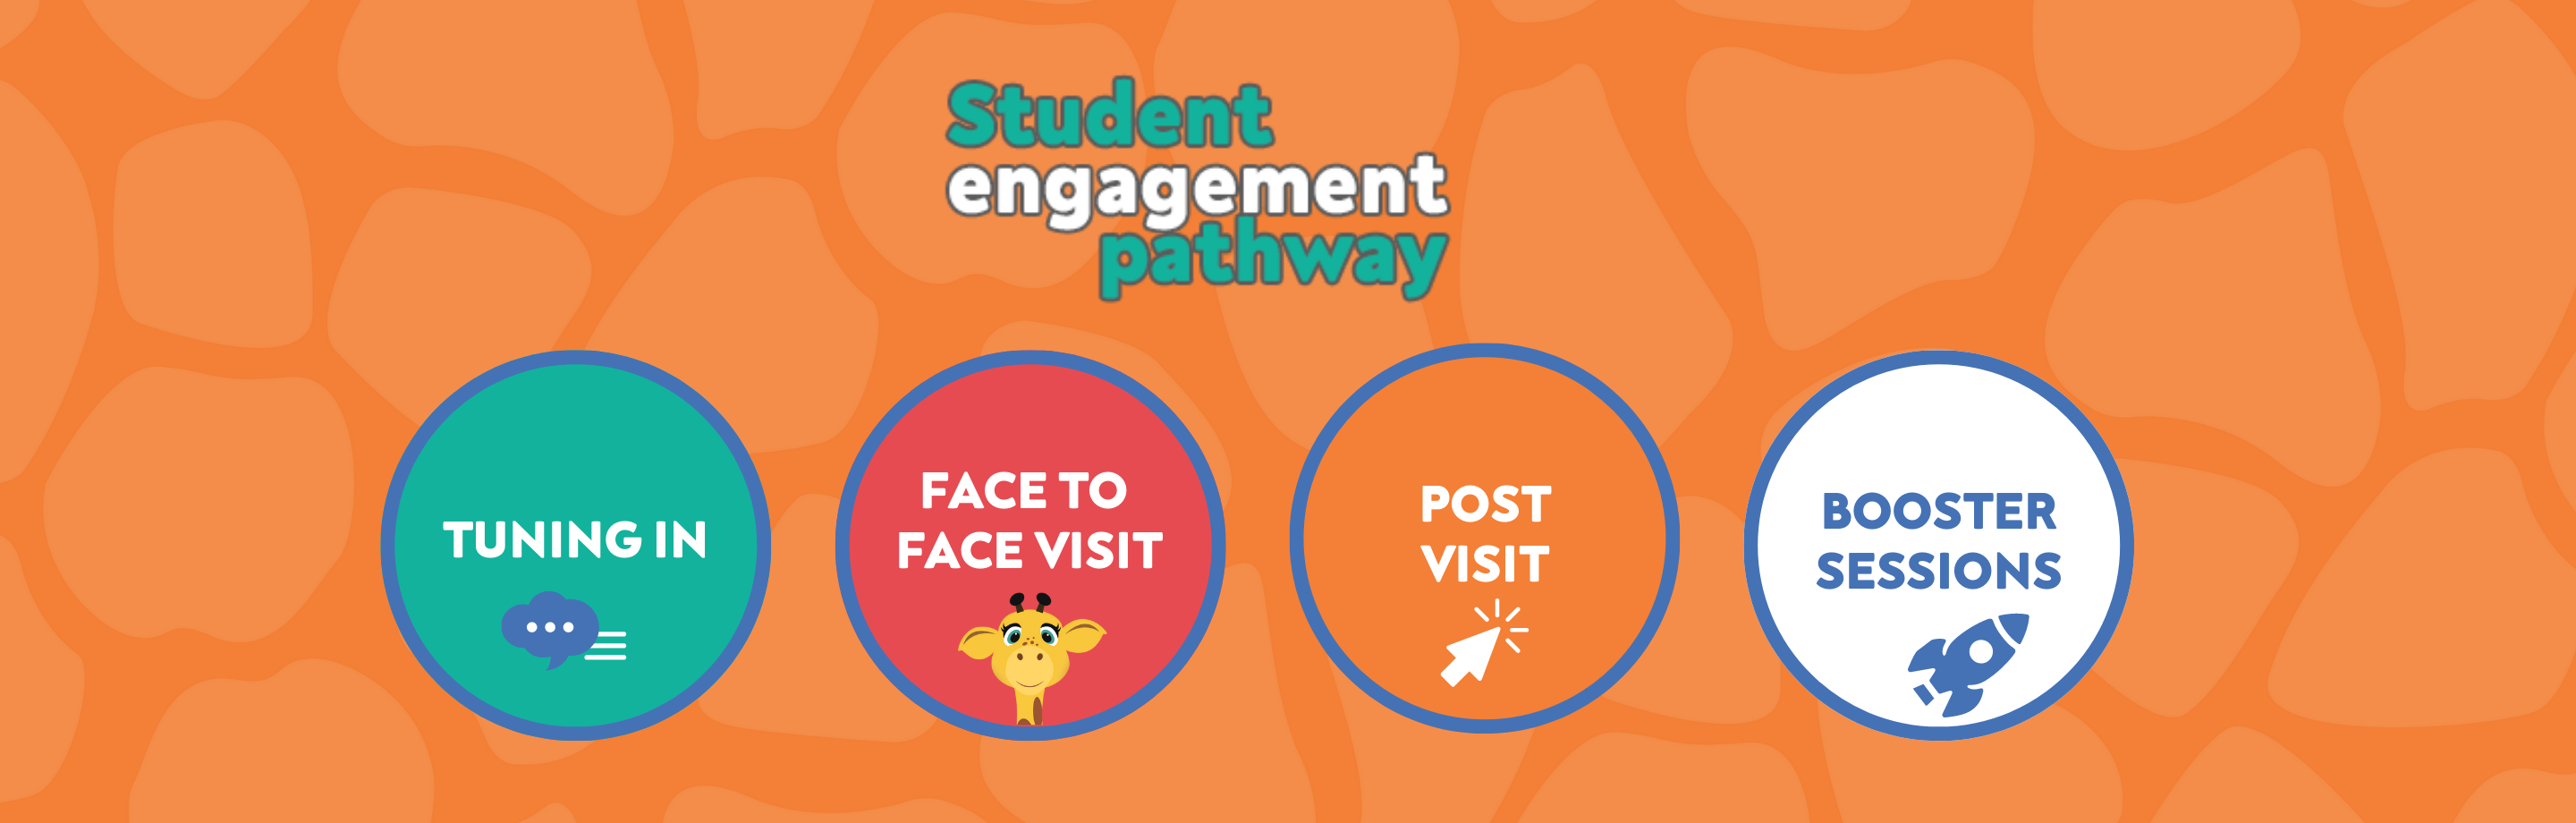 The student engagement pathway